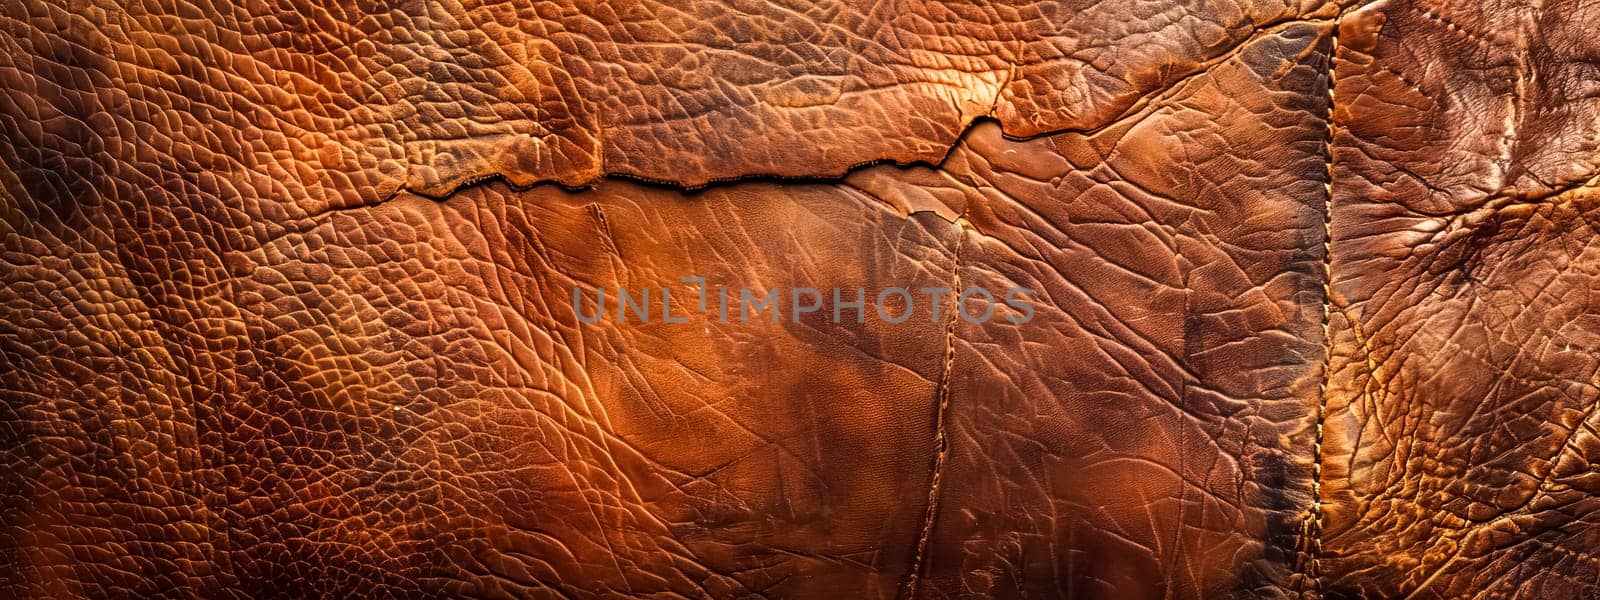 Close-up of a textured brown leather surface with natural wrinkles and cracks by Edophoto